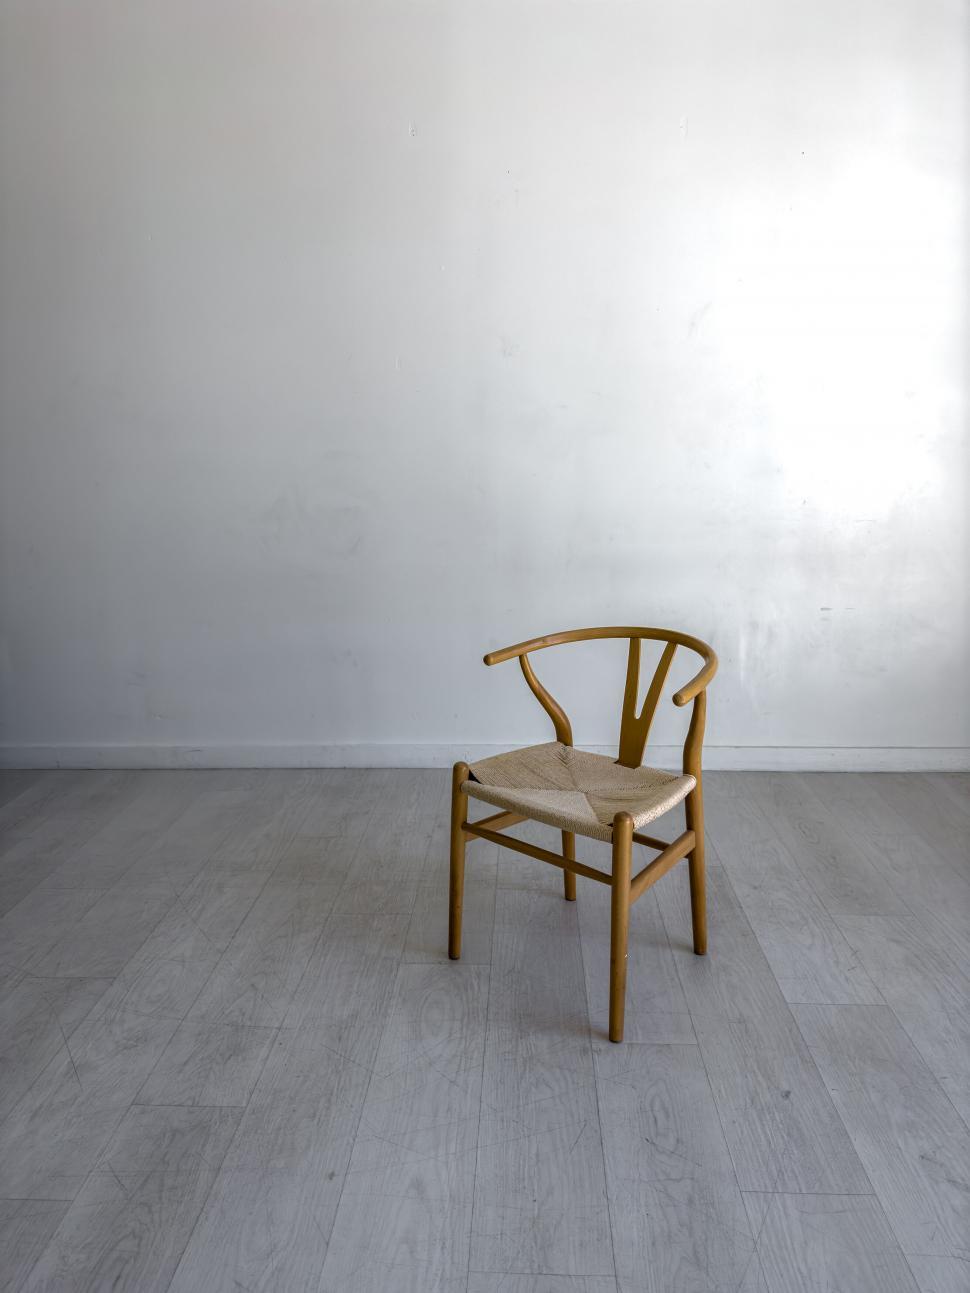 Free Image of Minimalistic wooden chair in empty room 